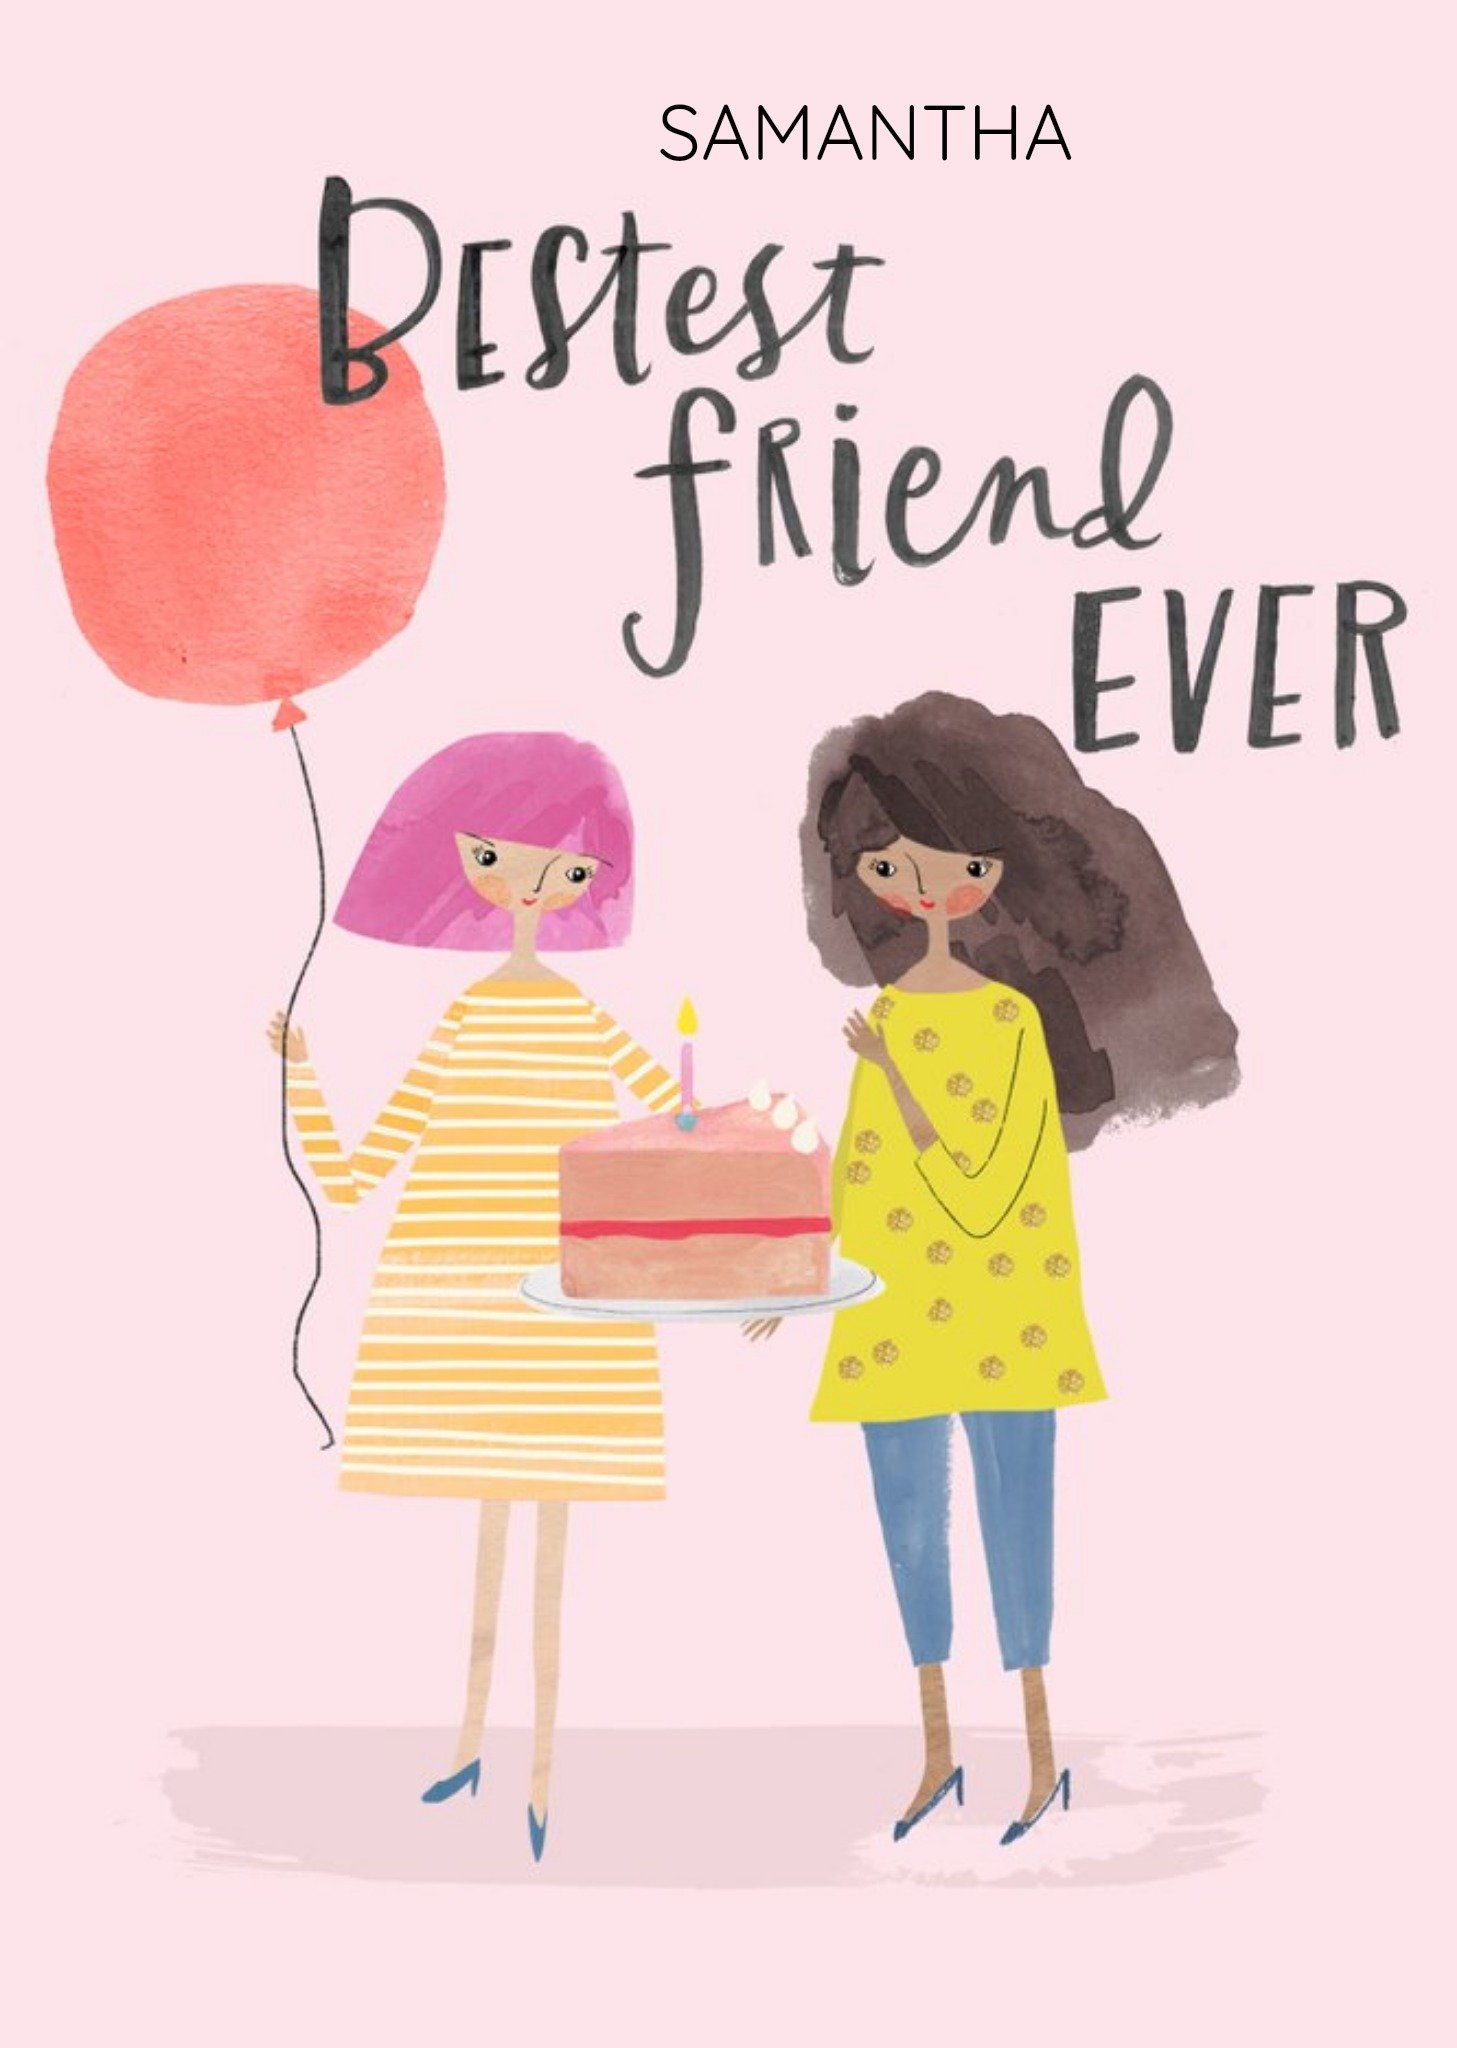 Moonpig Illustration Of Two Female Friends Bestest Friend Ever Card, Large